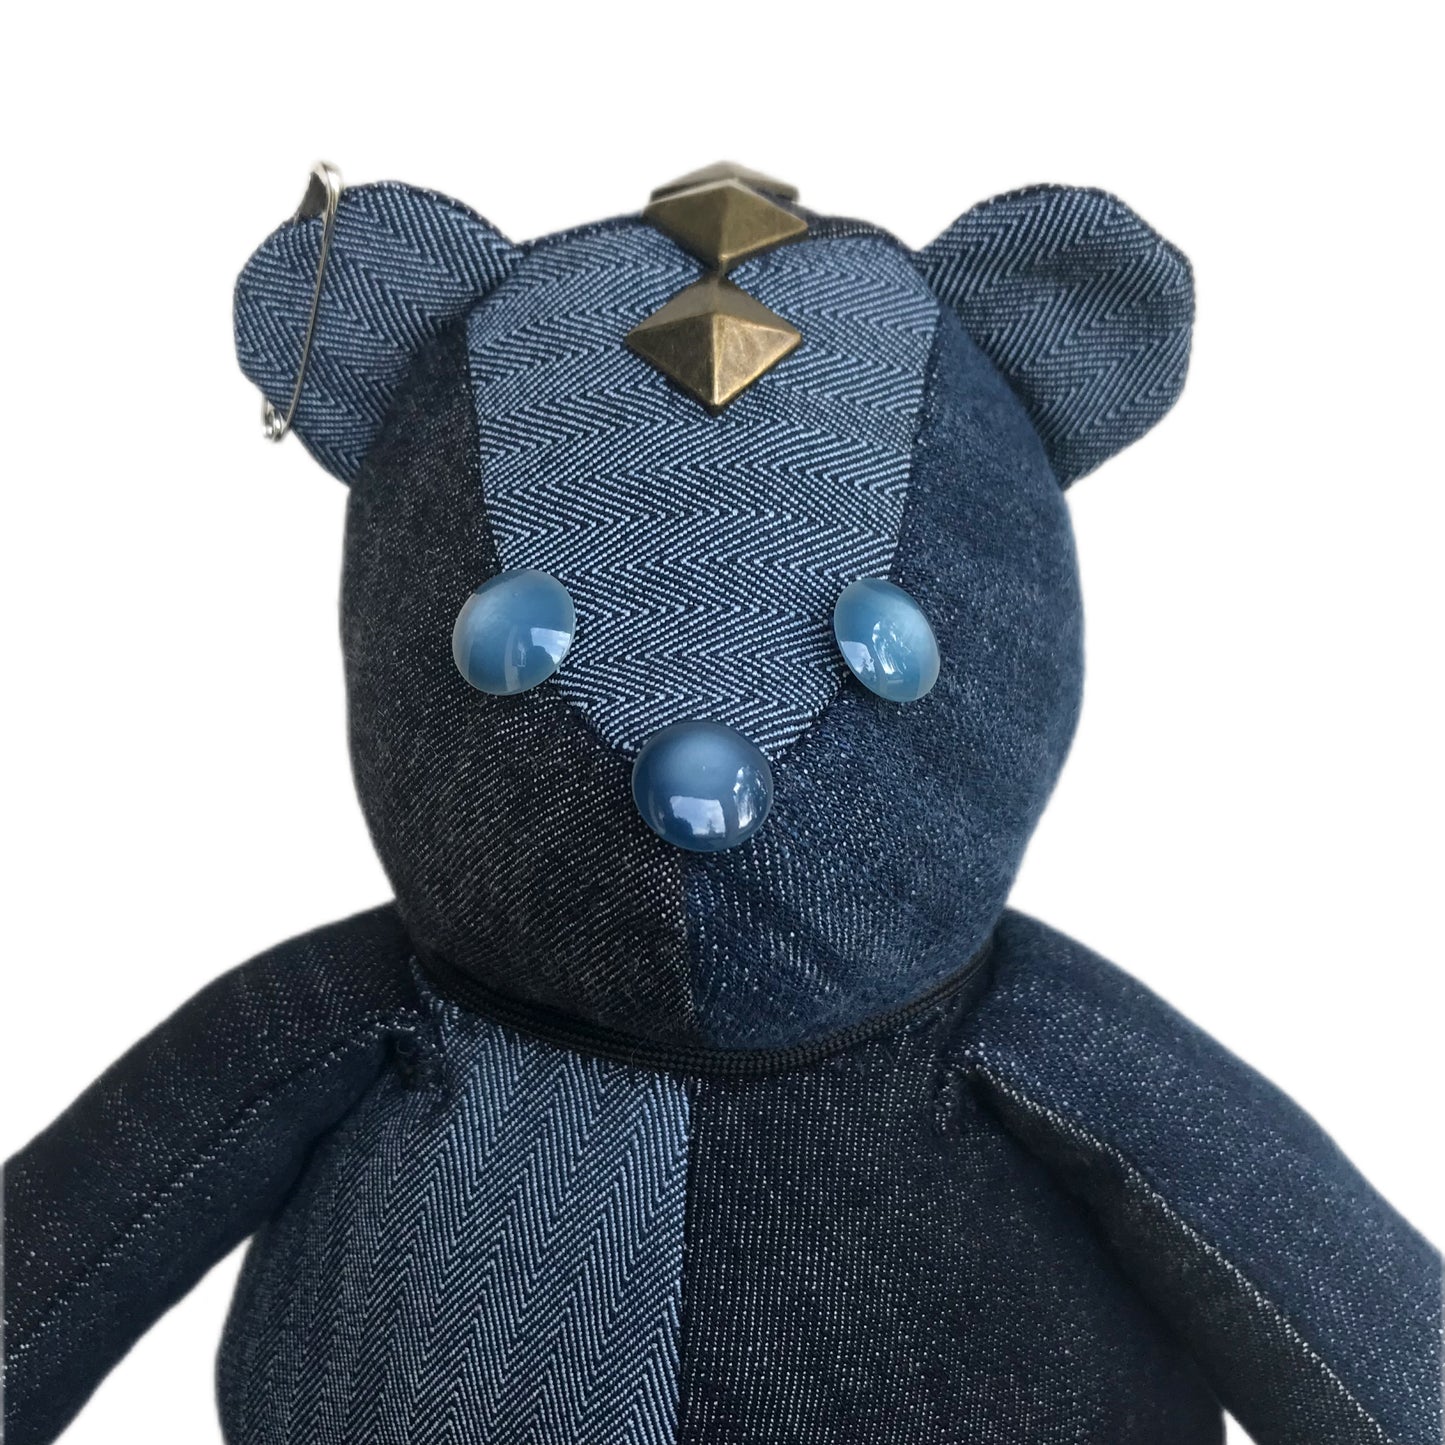 Punk Rock Teddy Bear - Made from Recycle Denim Jeans